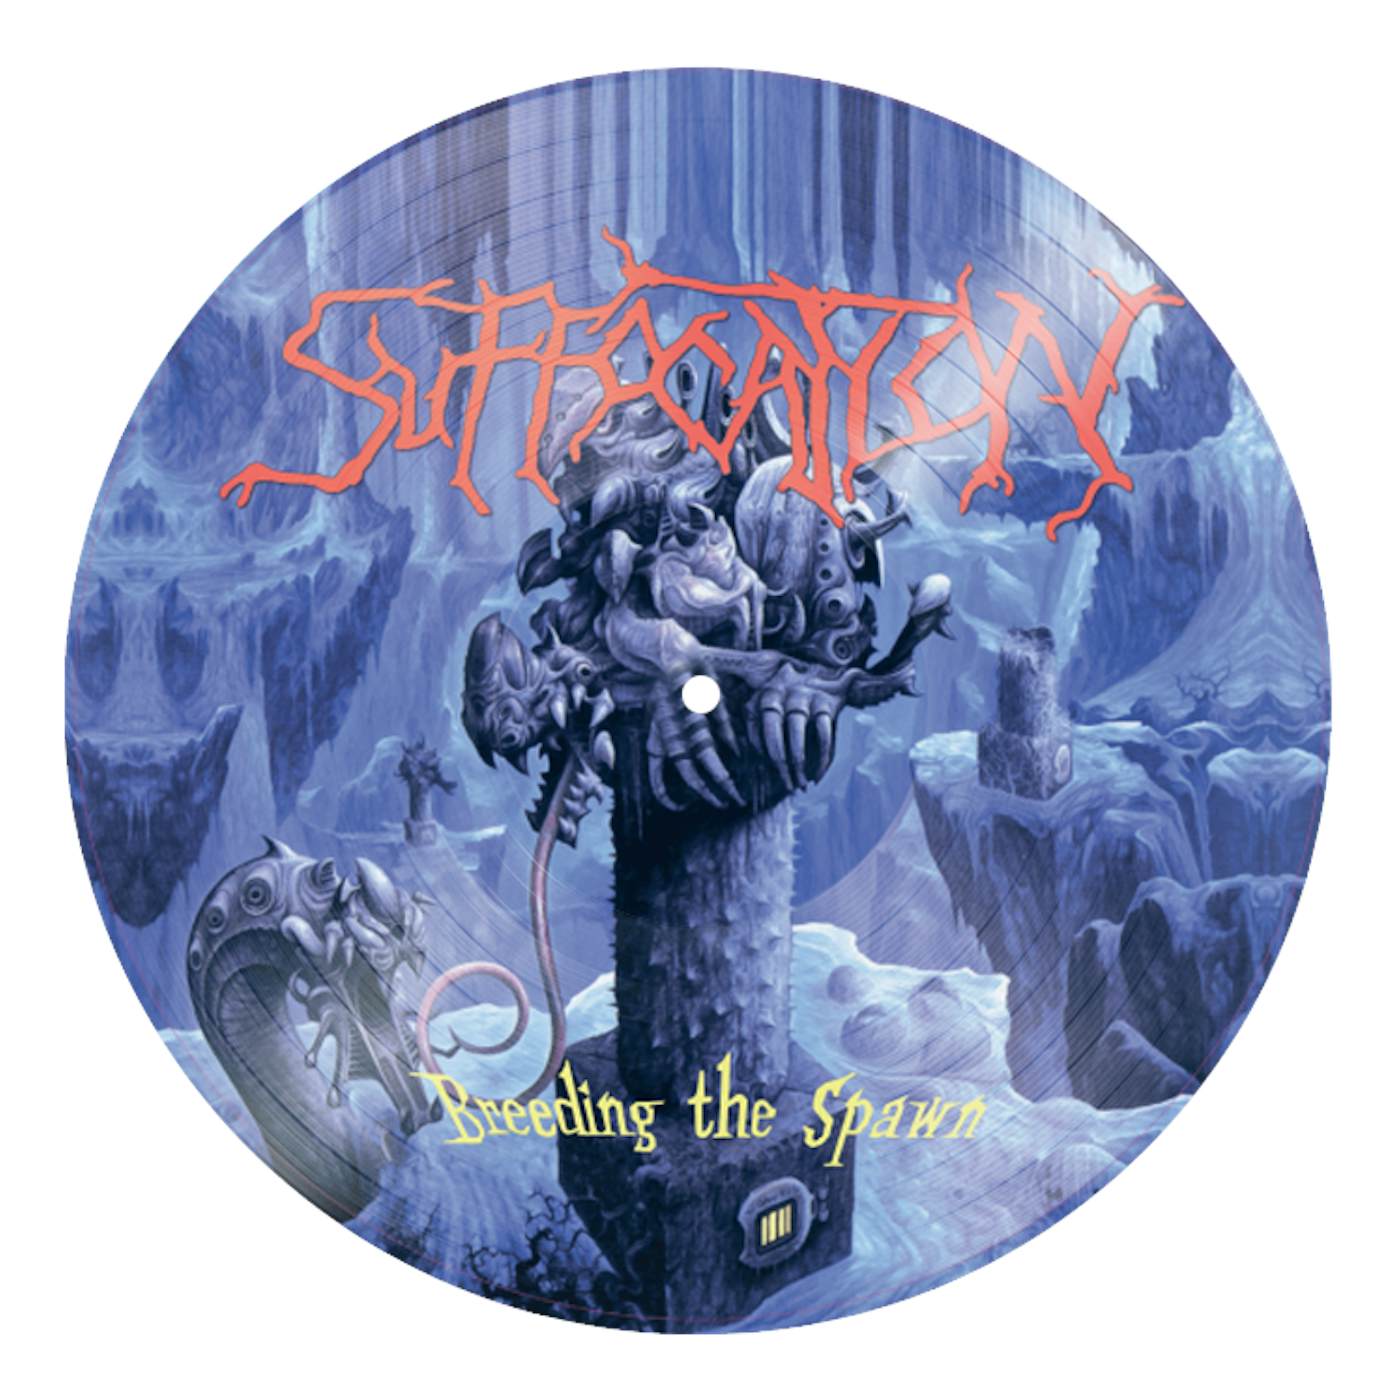 SUFFOCATION - 'Breeding The Spawn' LP Picture Disc (Vinyl)